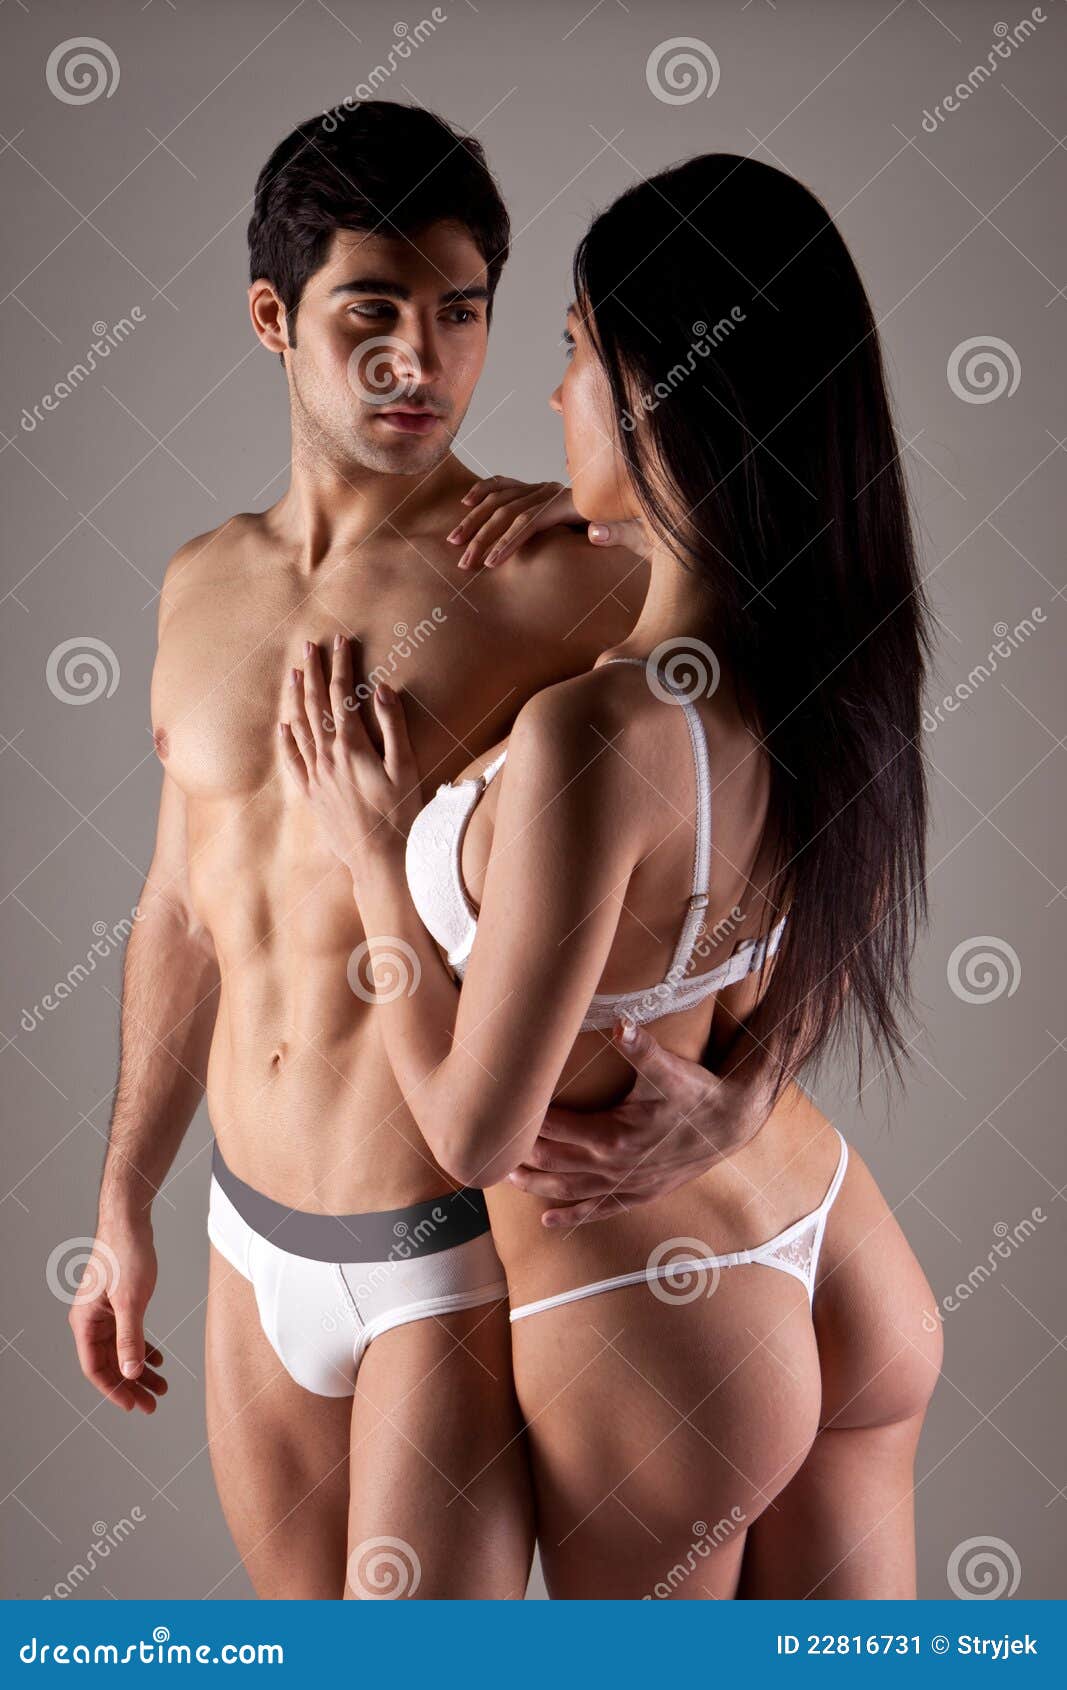 Passionate Couple in Underwear Stock Image - Image of feelings, sexual:  22816731